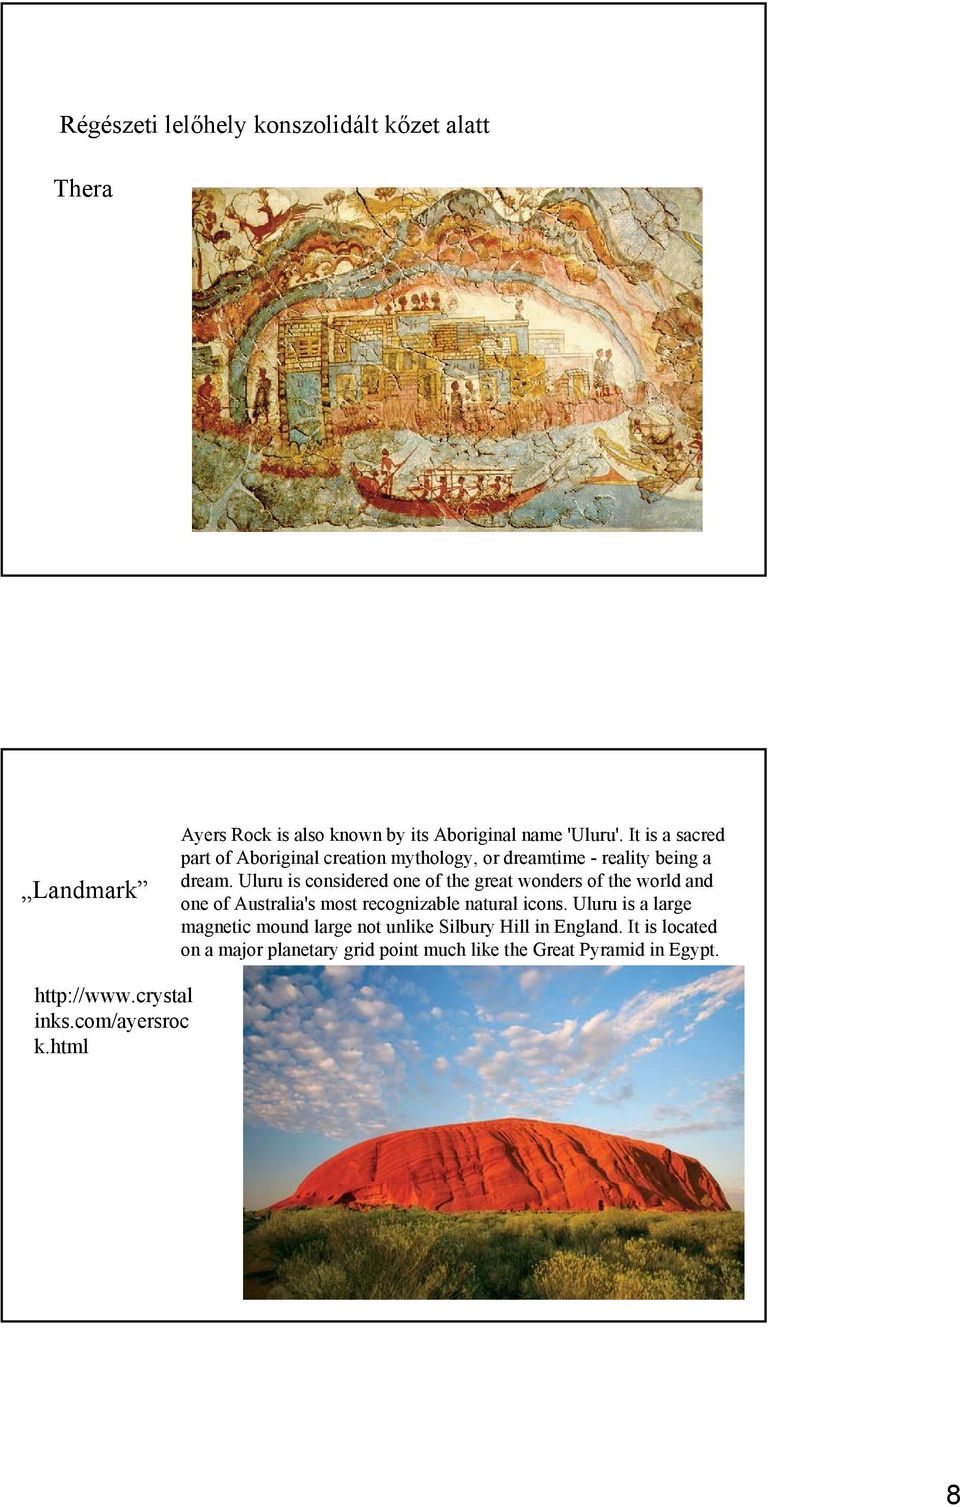 Uluru is considered one of the great wonders of the world and one of Australia's most recognizable natural icons.